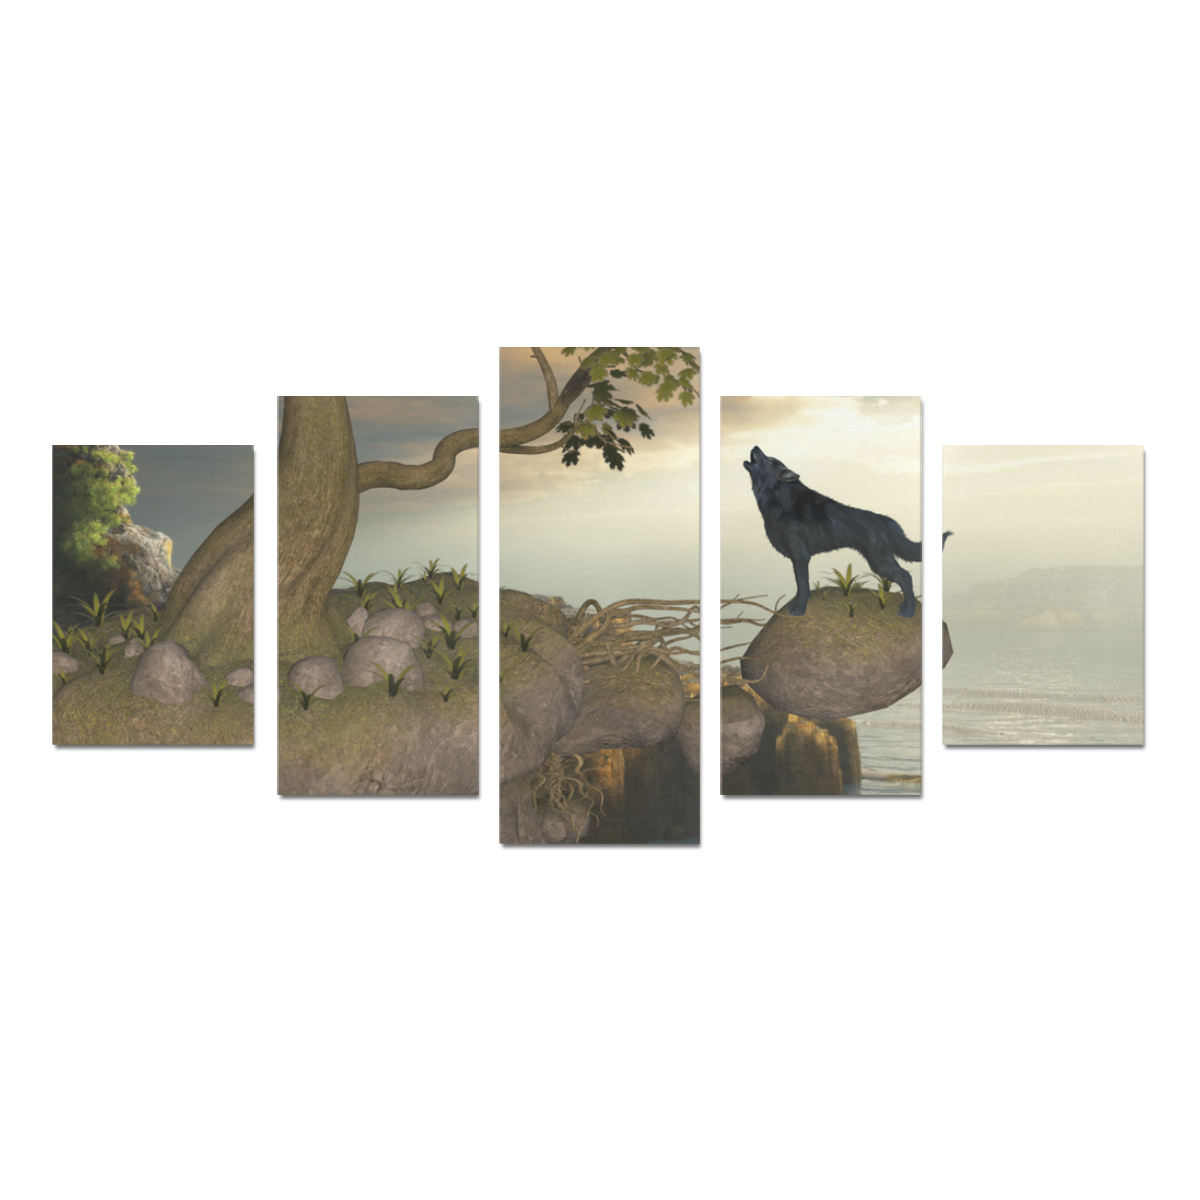 The lonely wolf on a flying rock Canvas Print Sets D (No Frame)